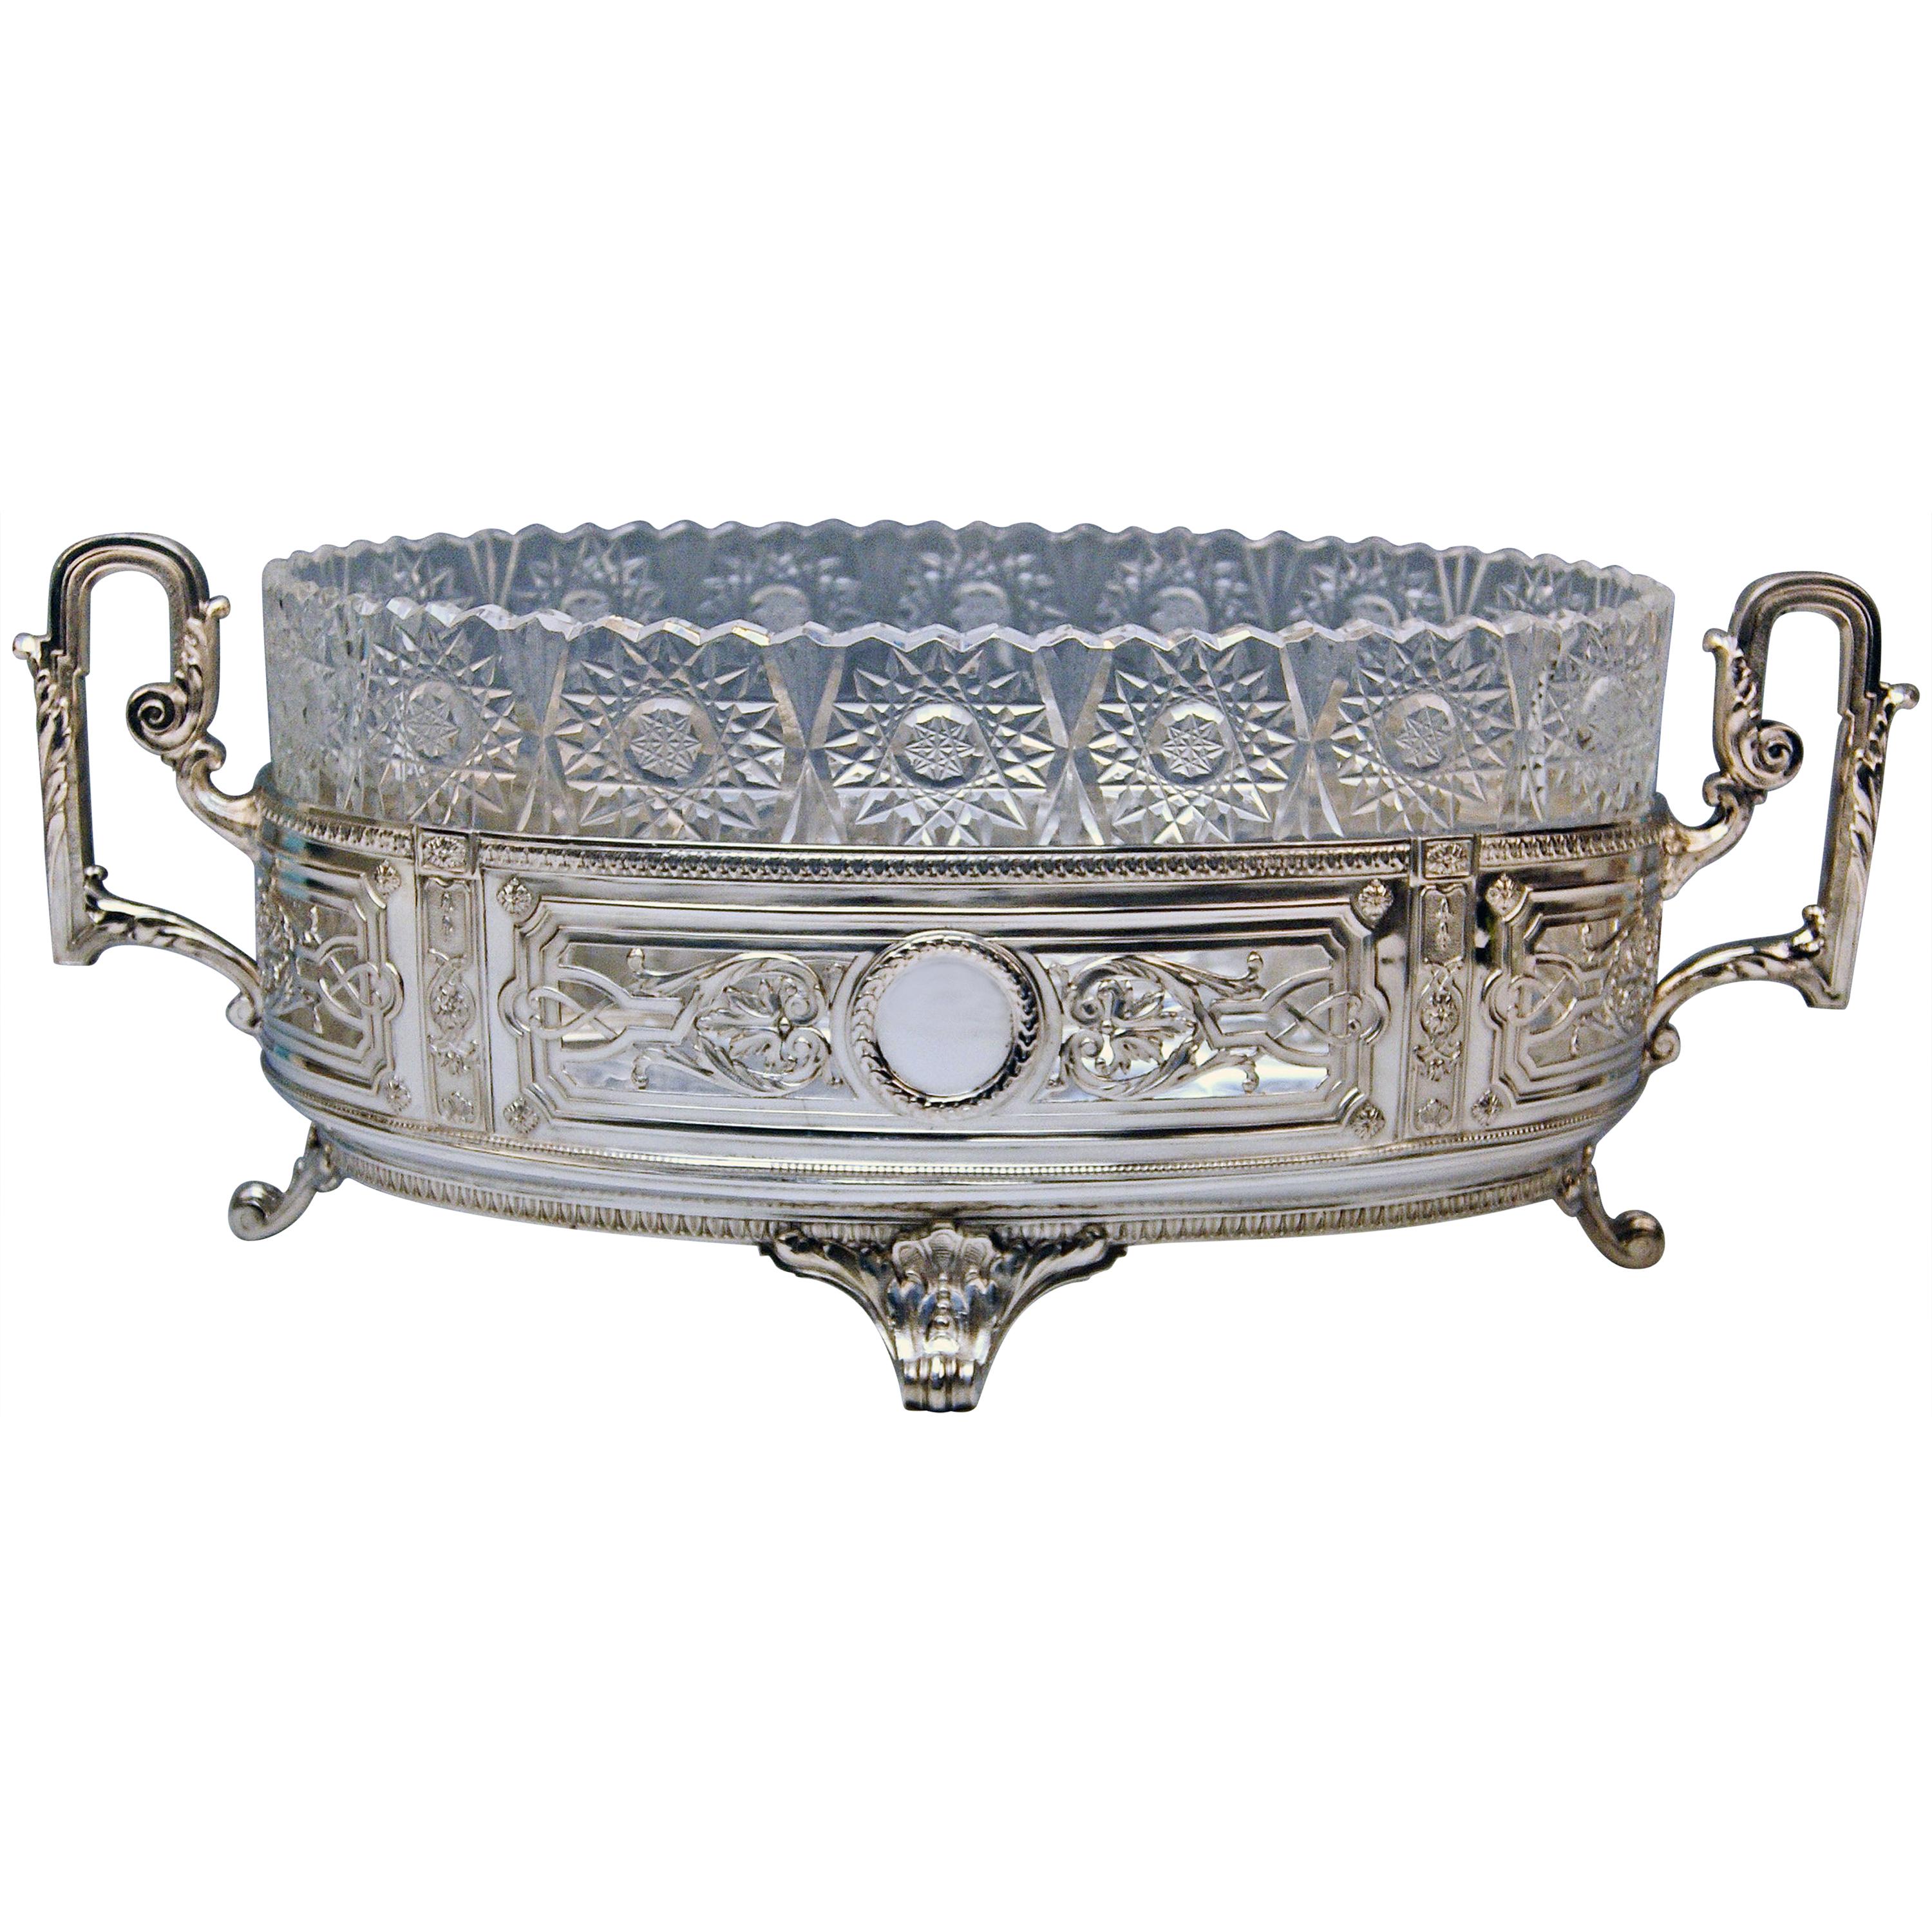 Silver Huge Flower Bowl Centrepiece Germany Made circa 1900